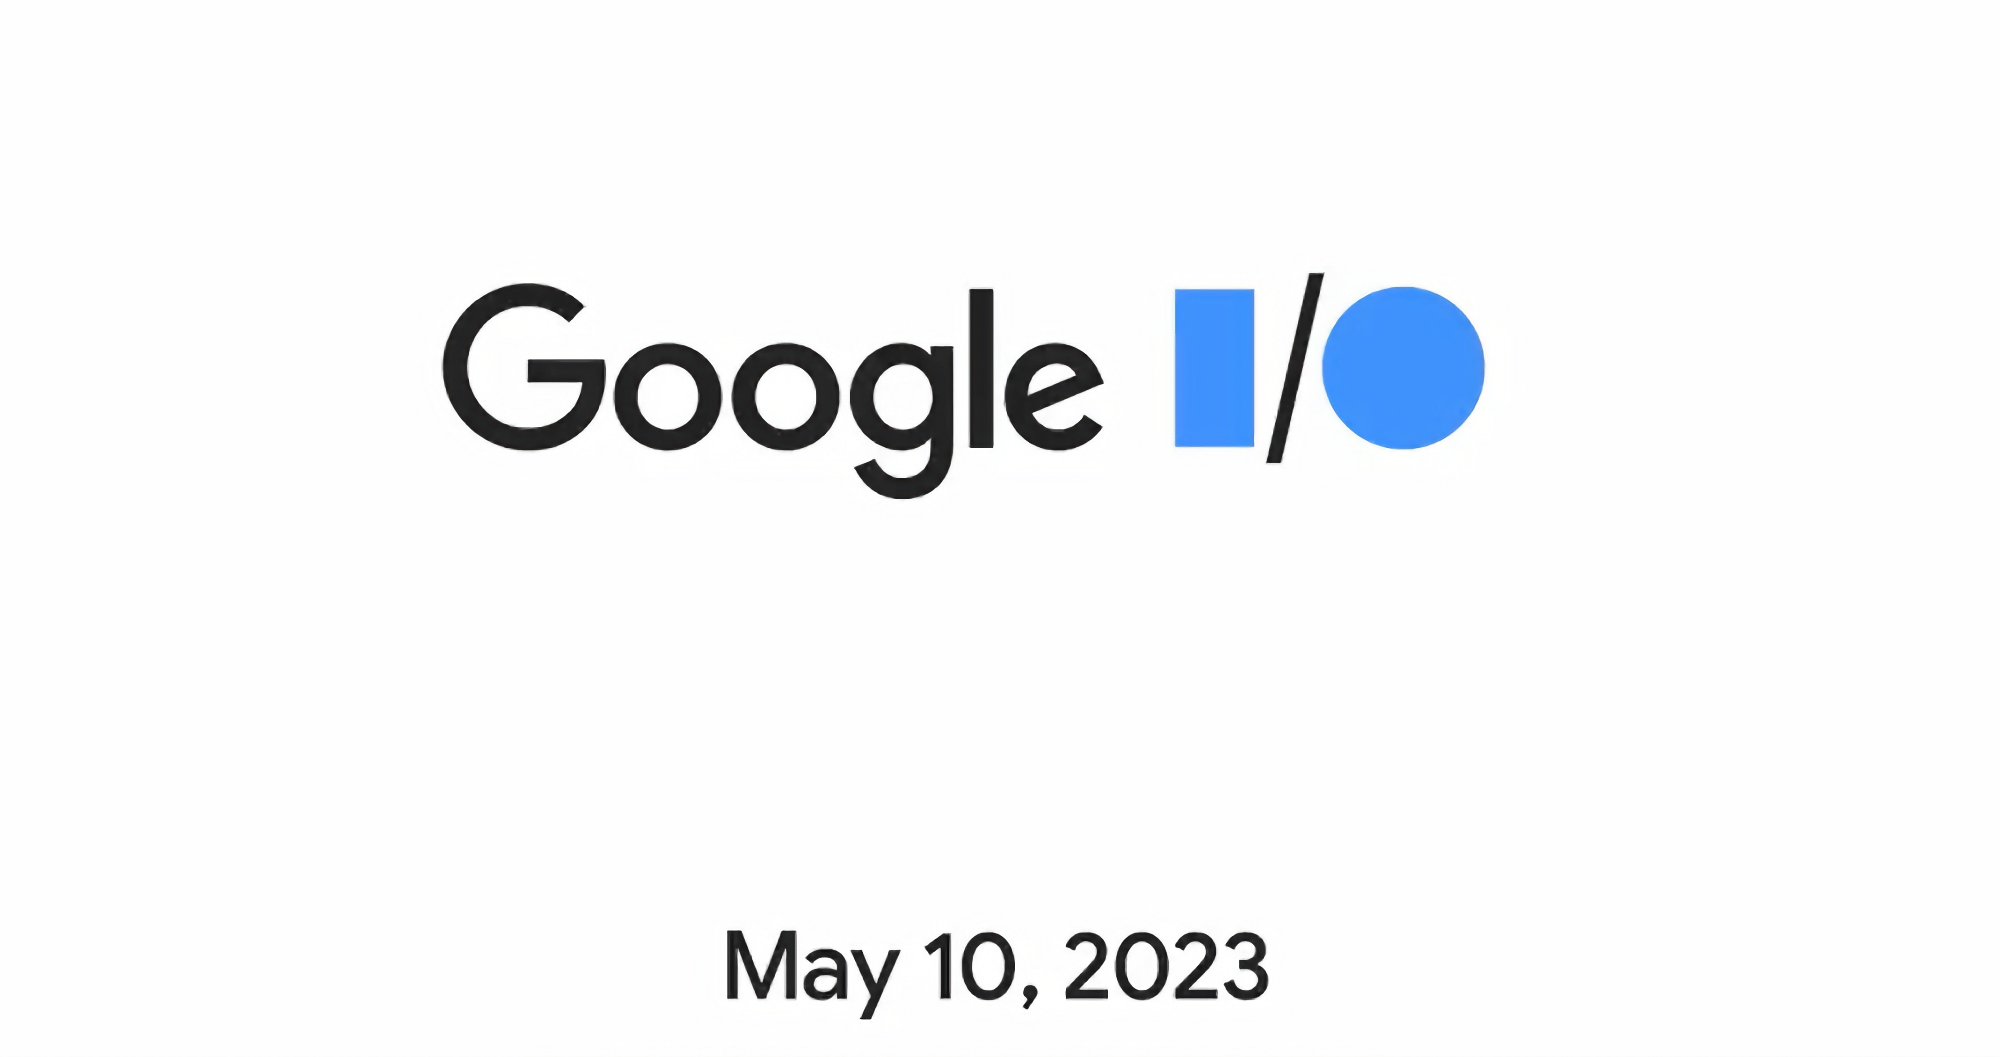 Google I/O 2023 to be held on May 10: Android 14, Pixel Tablet and Pixel 7a